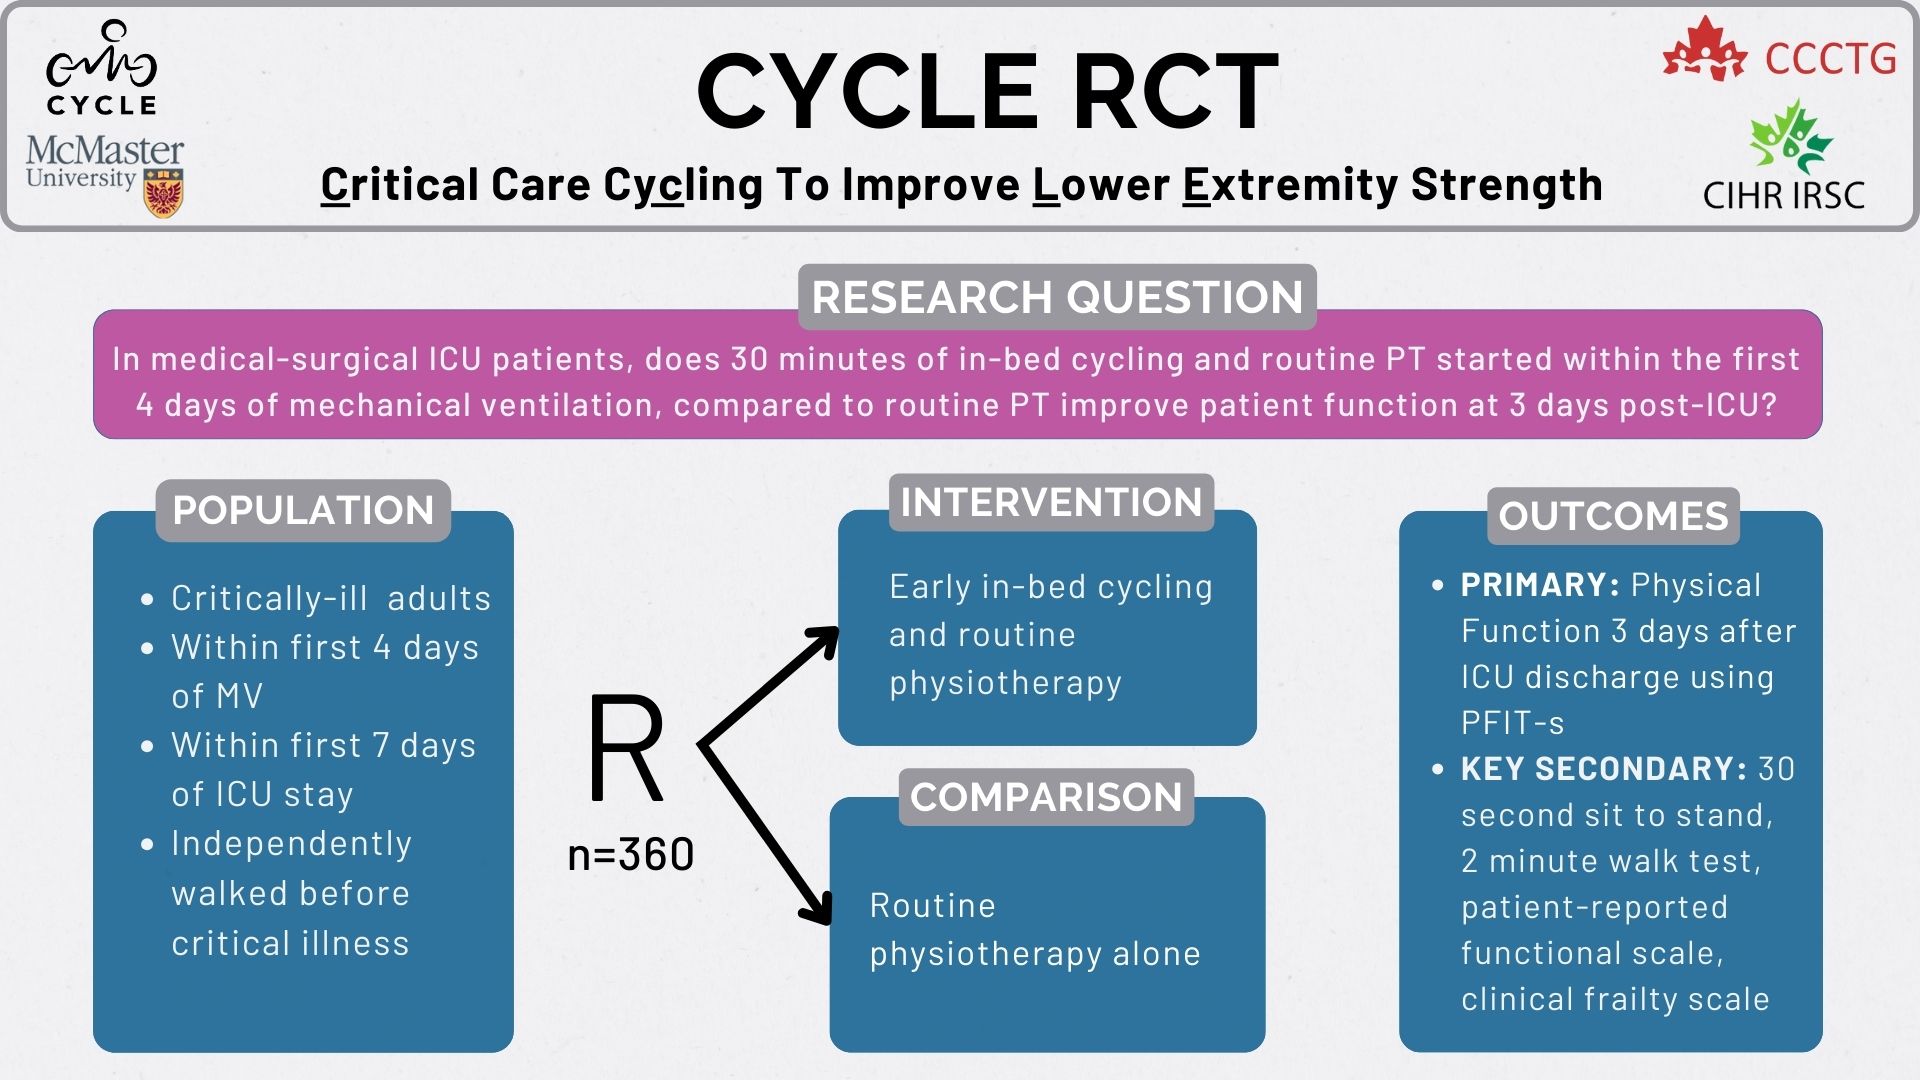 Critical Care Cycling To Improve Lower Extremity Strength